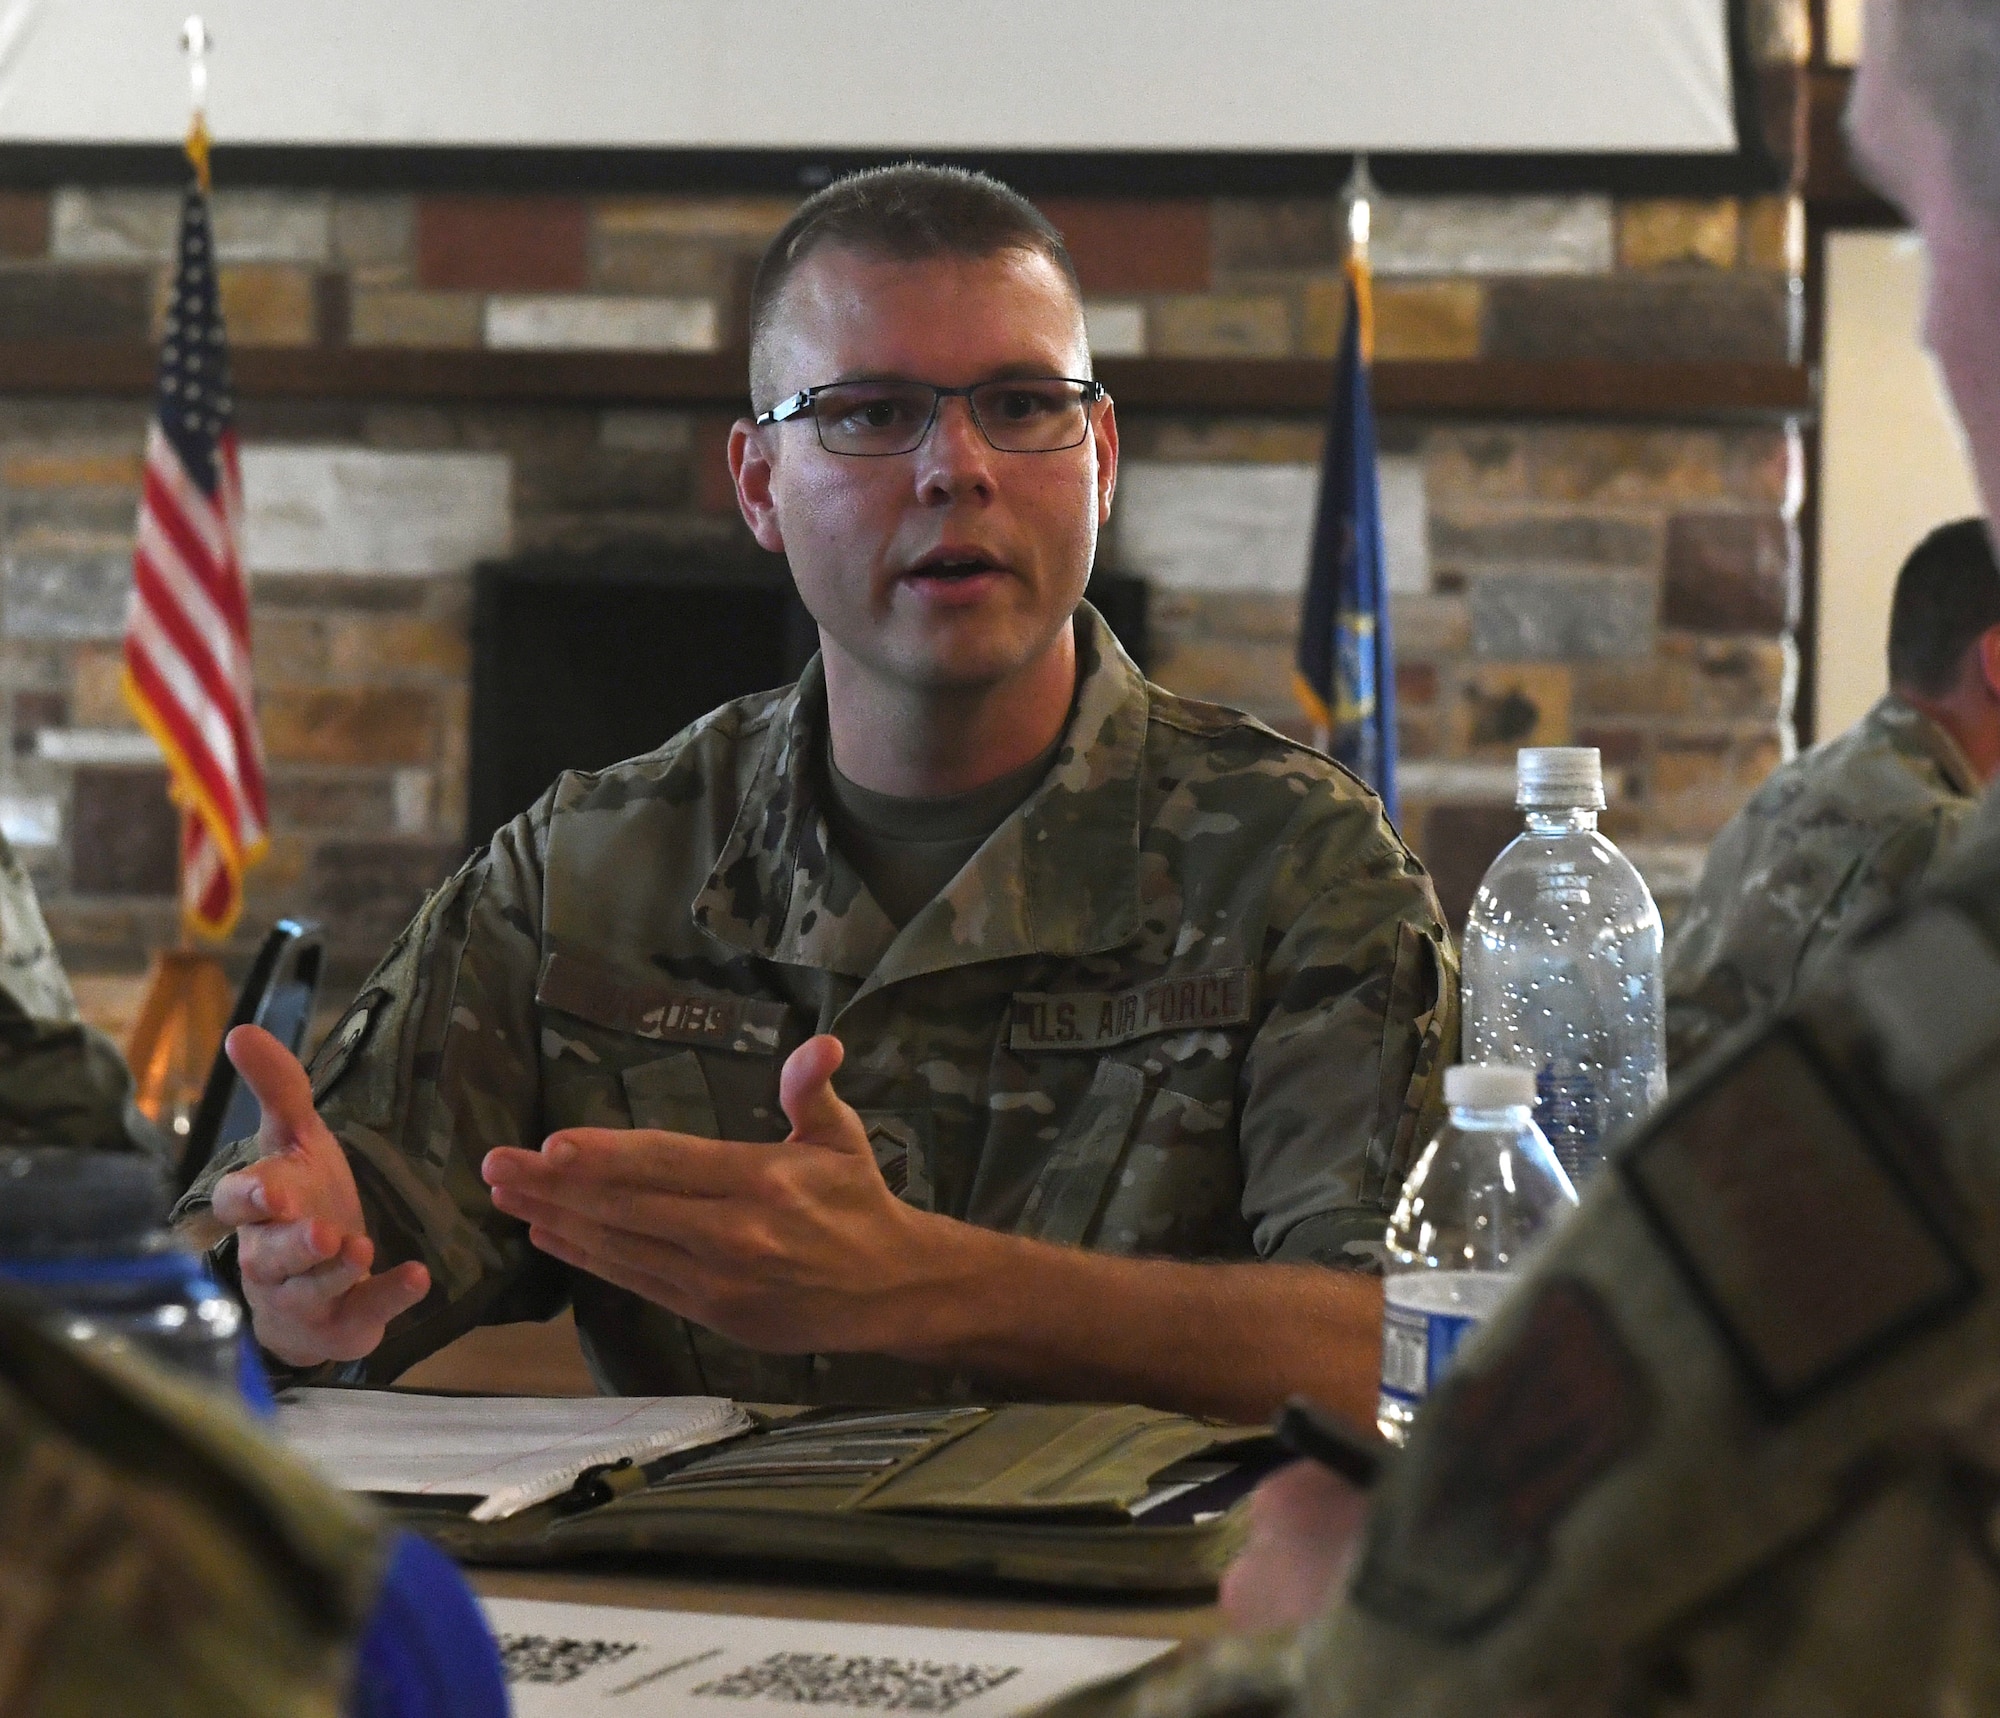 U.S. Air Force Master Sgt. Shawn Jacobs, intelligence training non-commissioned officer in charge of the 193rd Air Intelligence Squadron in State College, Pennsylvania, shares his Air National Guard experience and gives advice to non-commissioned officers in a speed-mentoring exercise during the leadership development program held at Fort Indiantown Gap, Pennsylvania, Sept. 20, 2022.